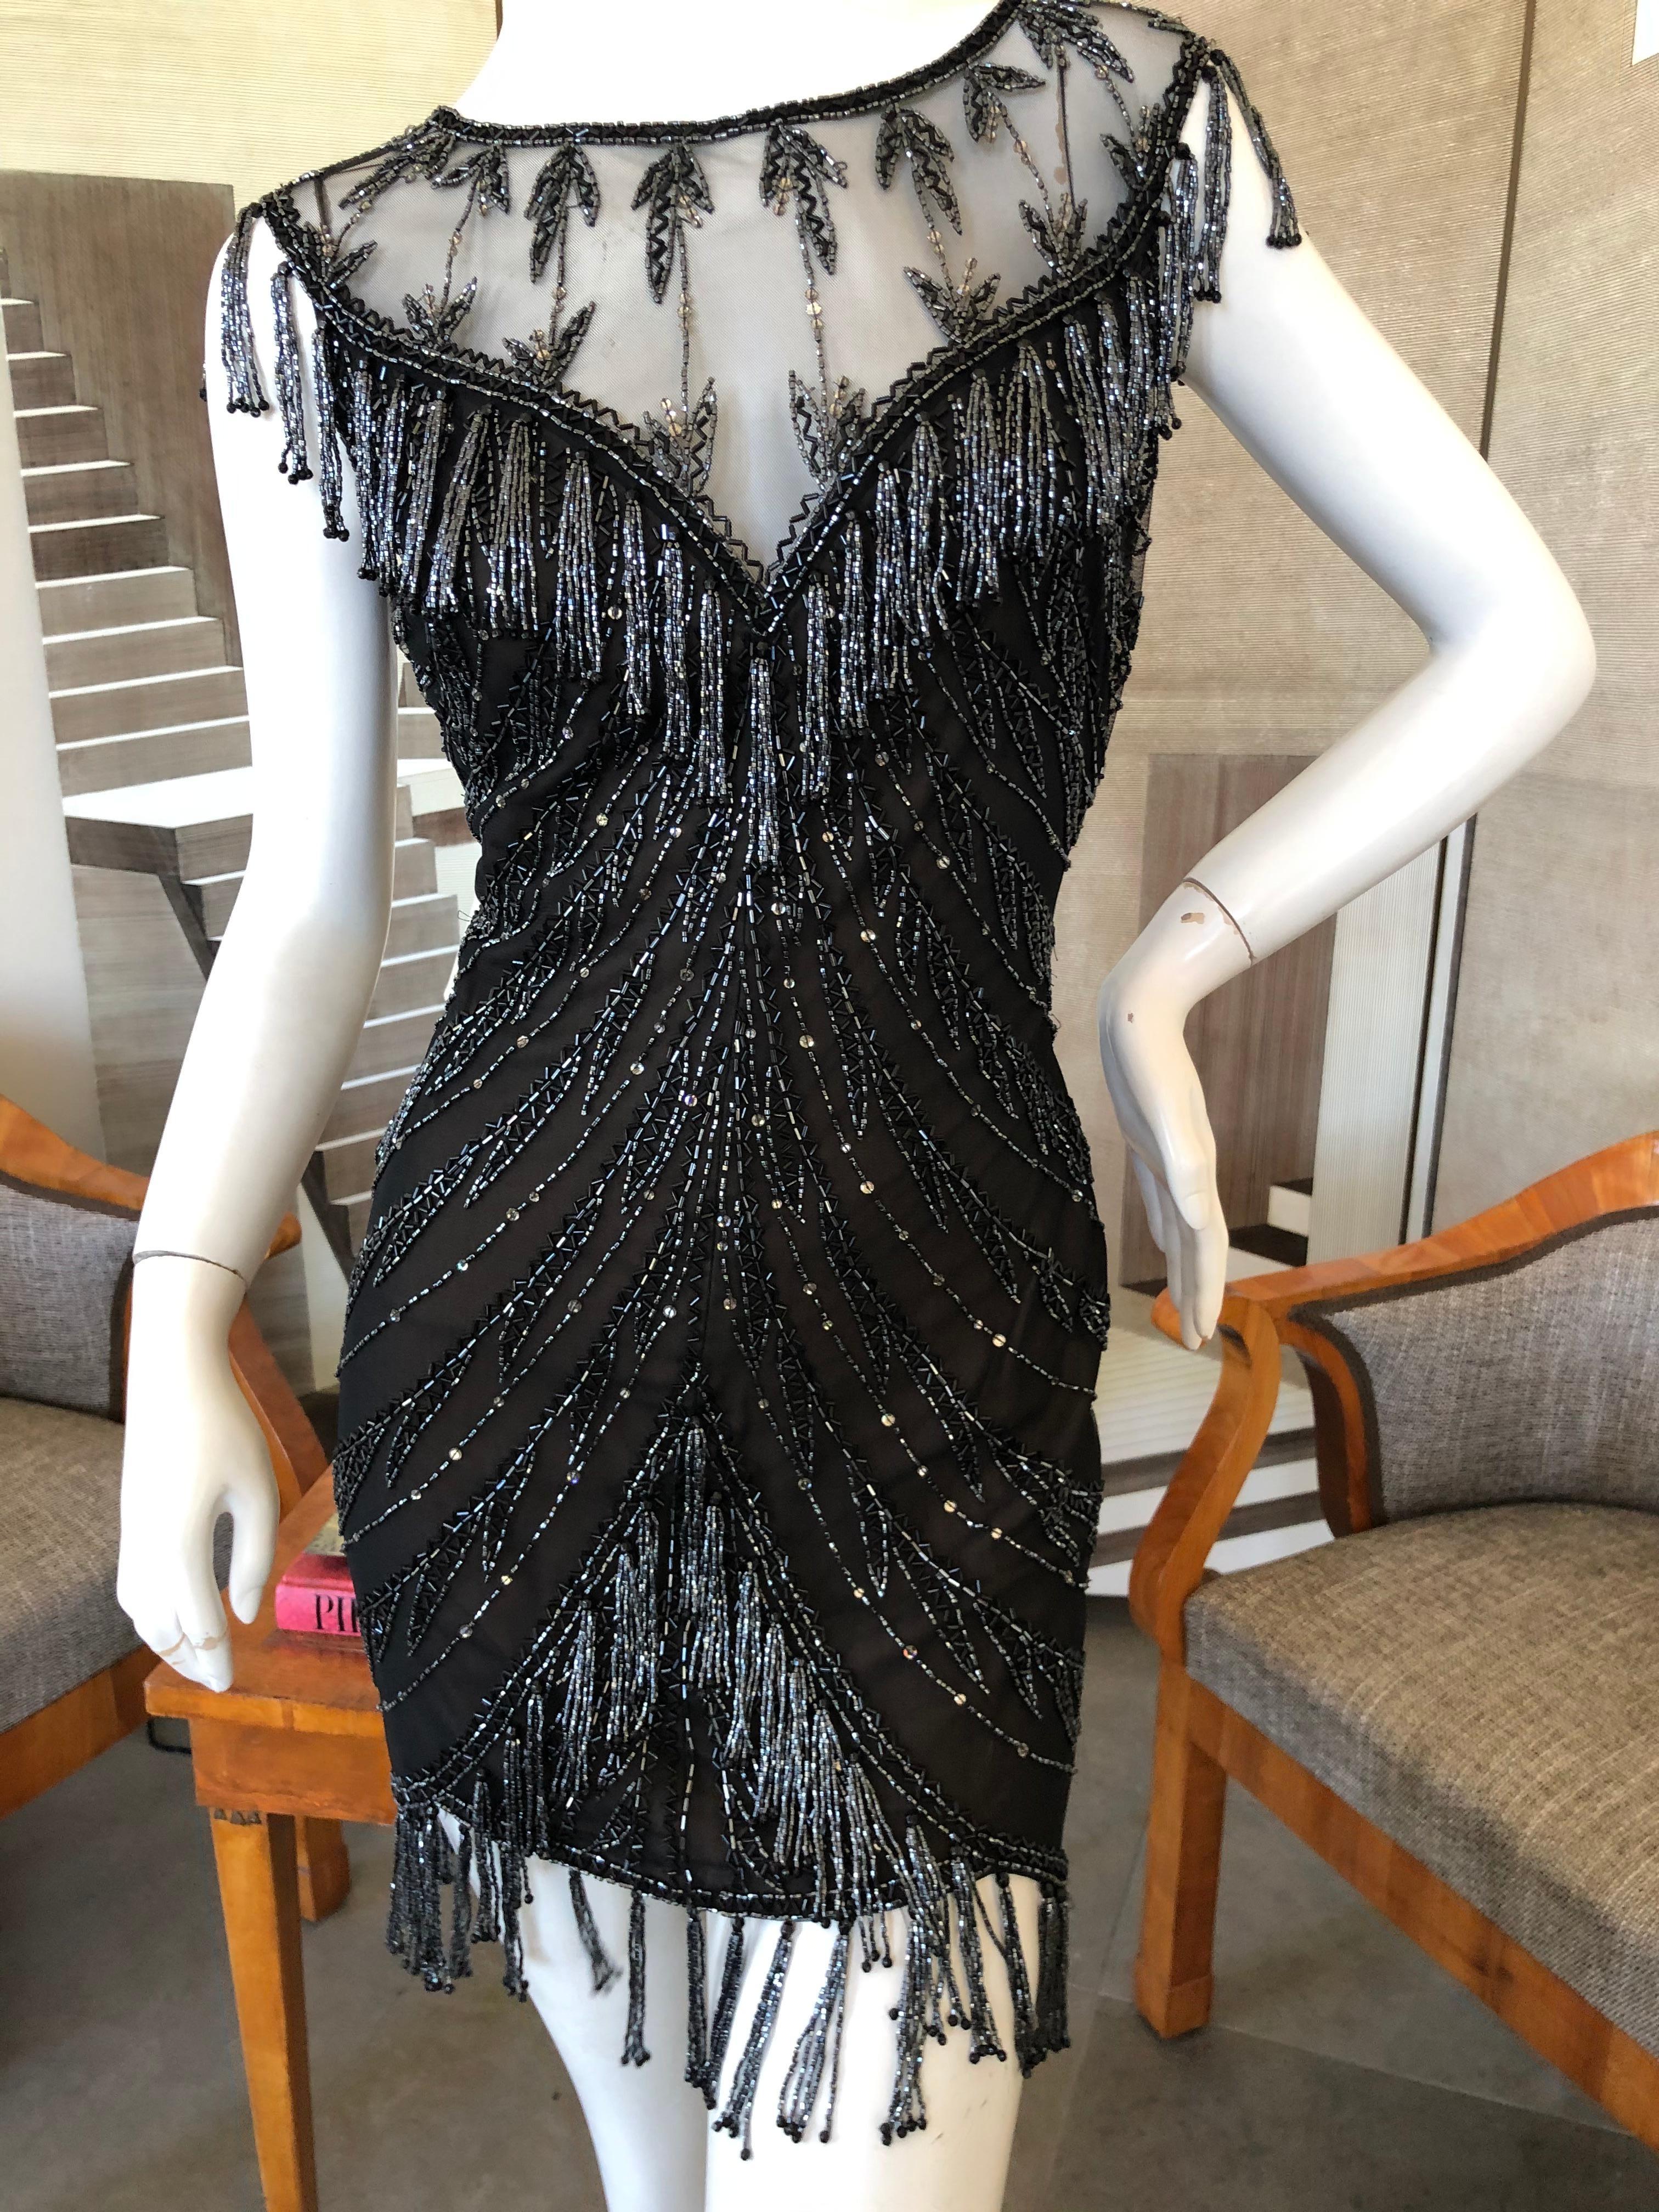 Bob Mackie Vintage Sheer Little Black Dress with Bugle Bead Fringe.
So much prettier than the photos, please use zoom feature to see details.
Size 6 vintage is more like a 4 today
Bust 38